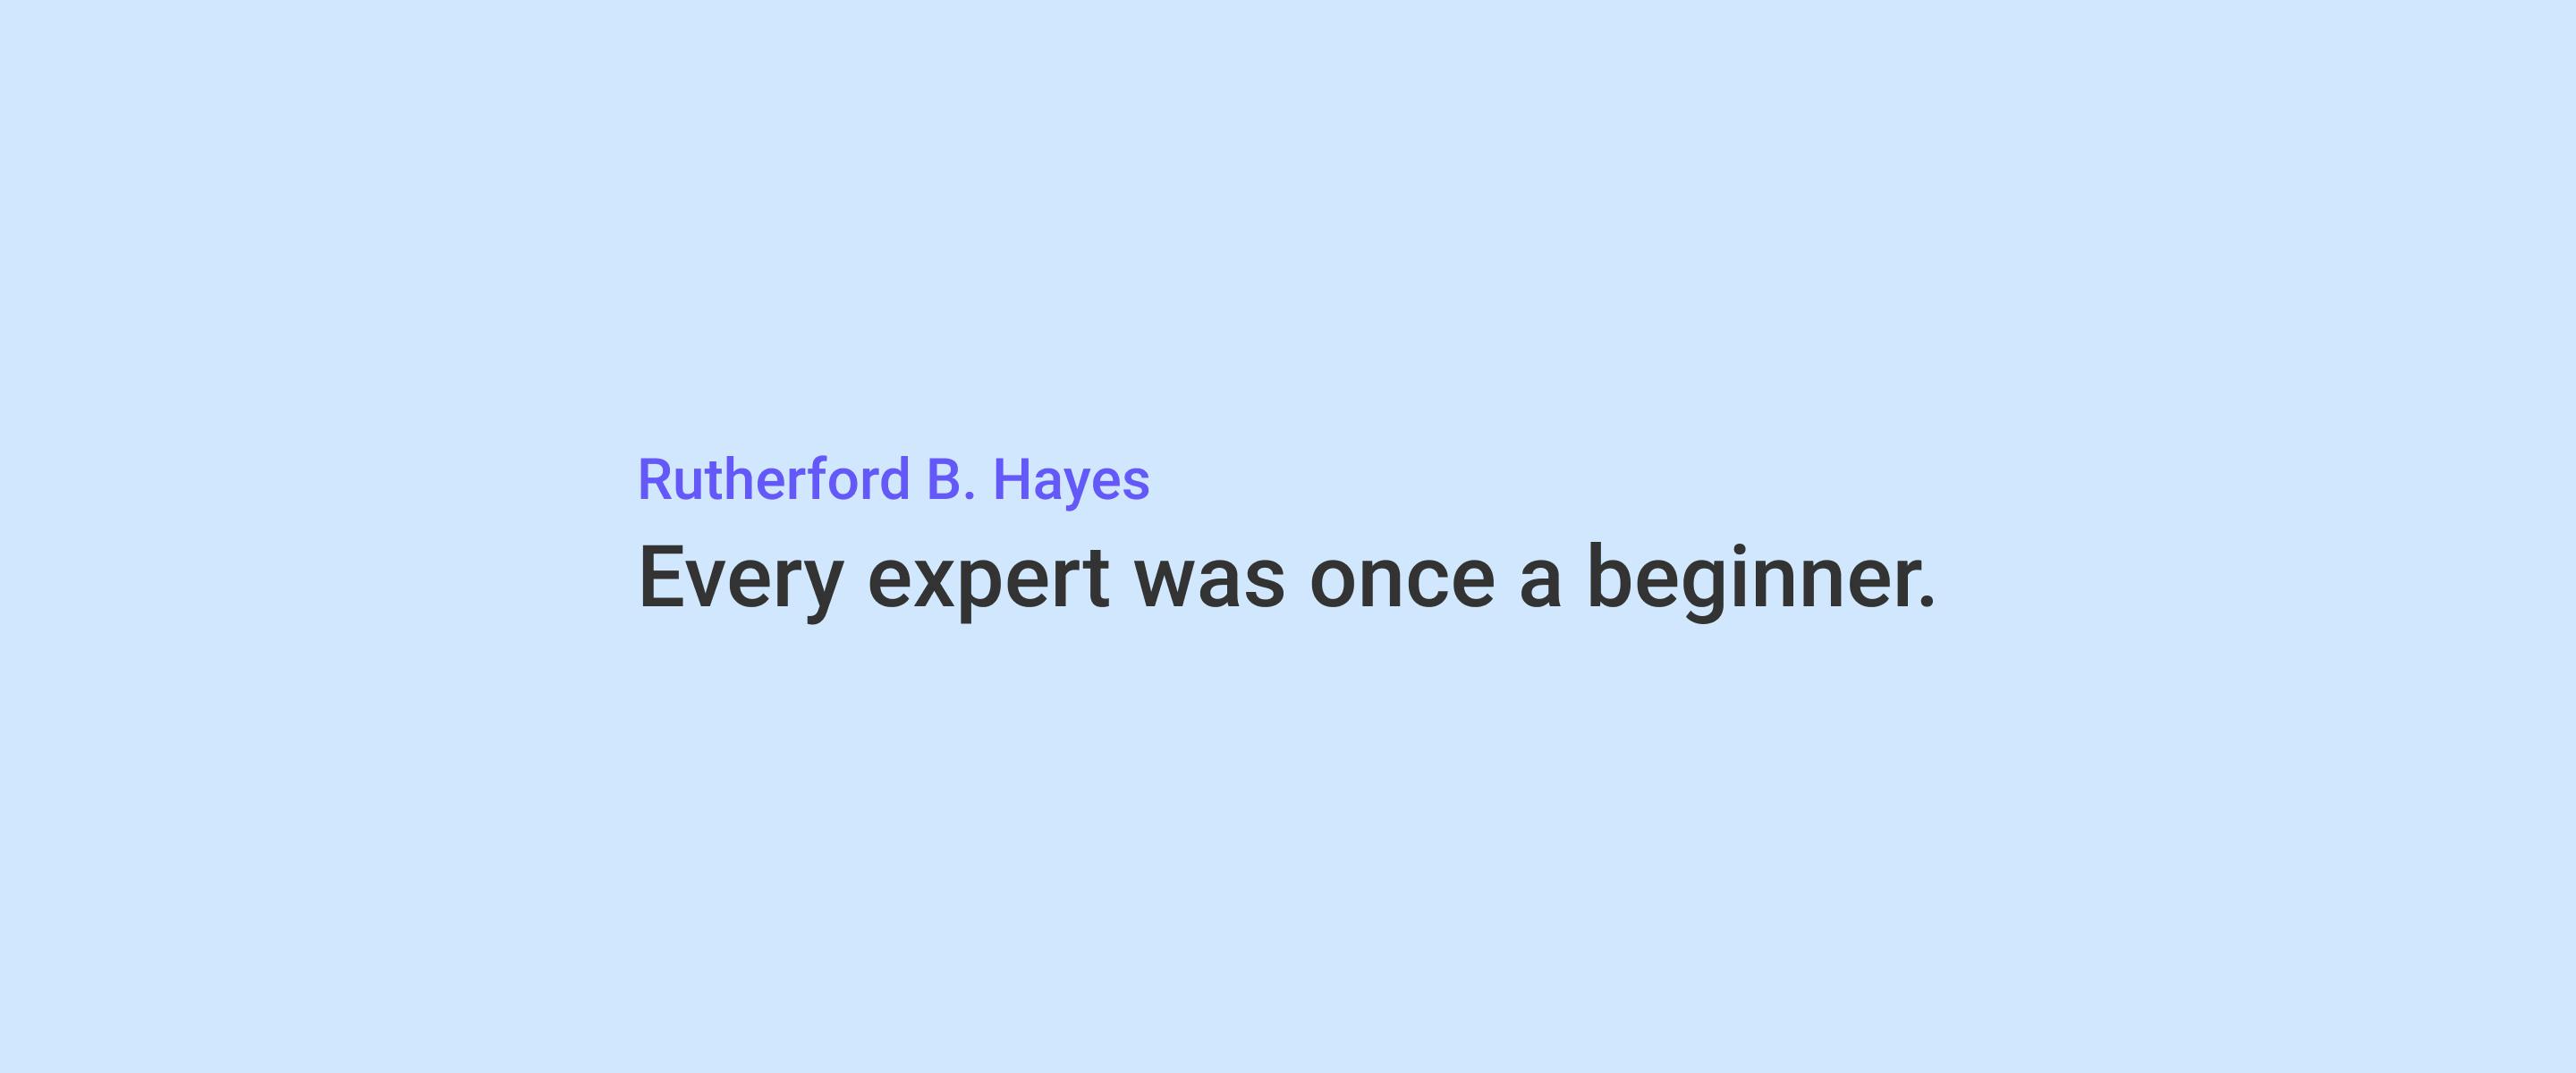 Quote by Rutherford B. Hayes that says "Every expert was once a beginner"